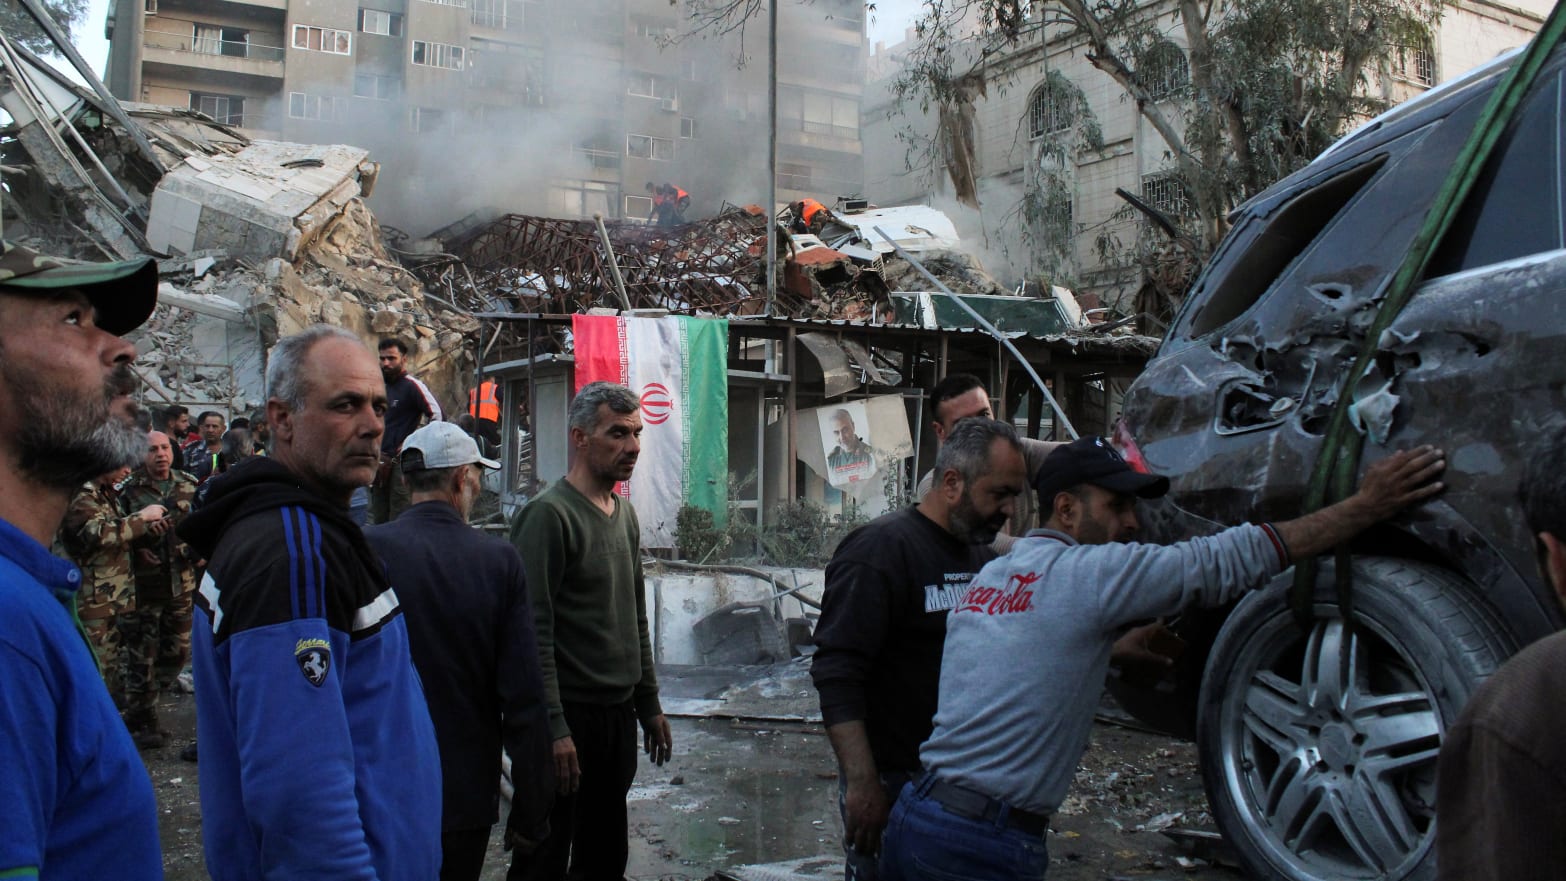 Rescue workers move near the scene of an airstrike in Damascus, Syria.